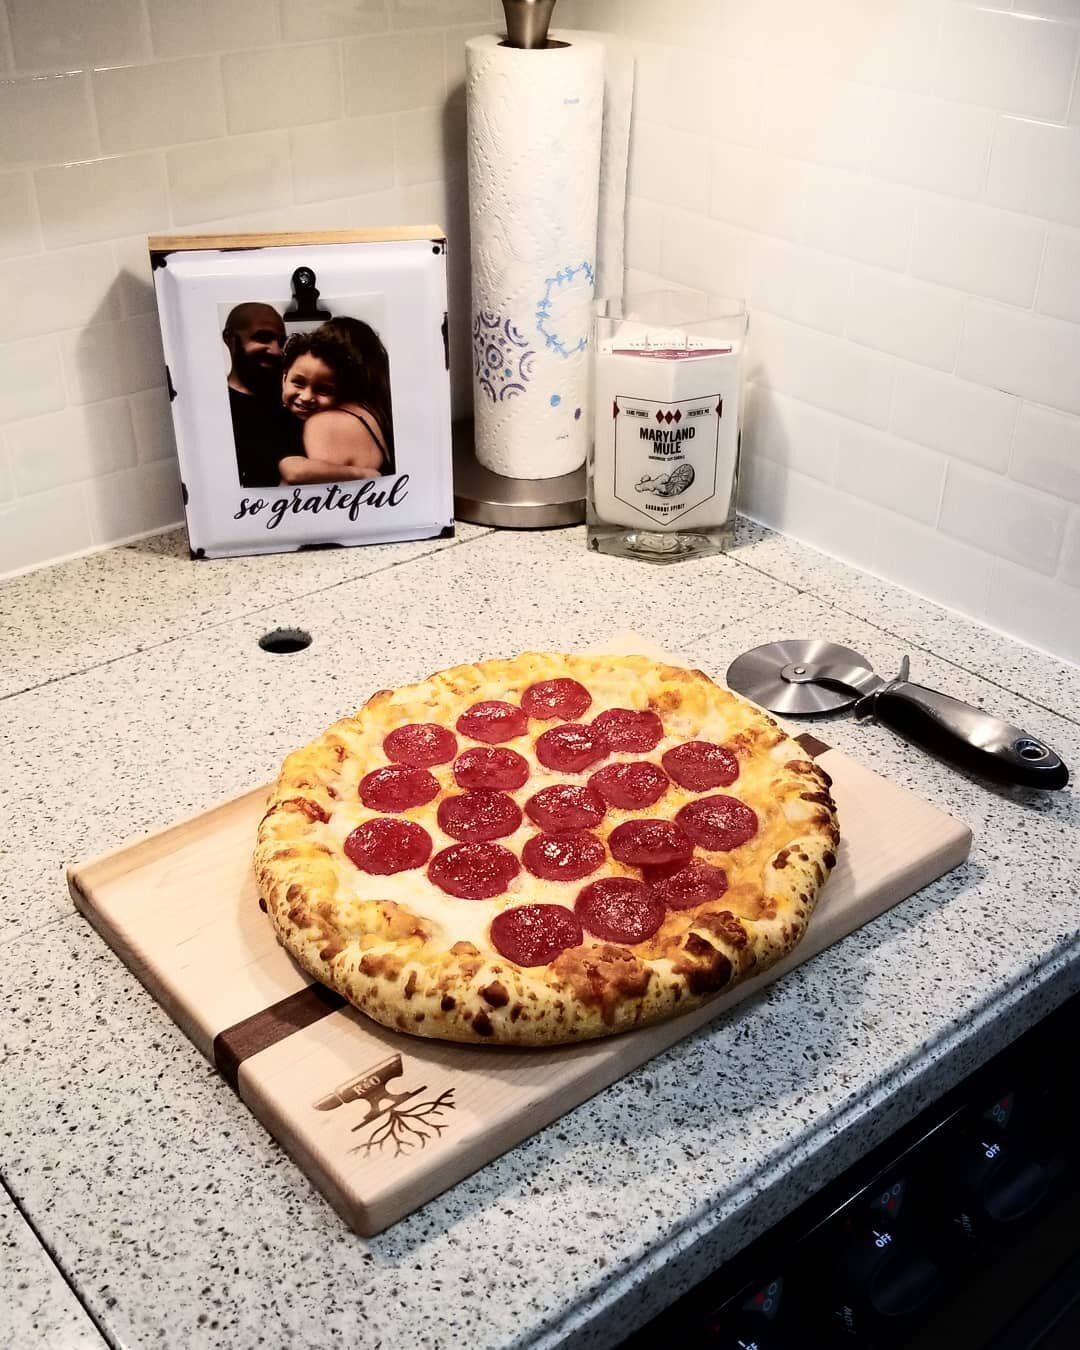 First night on the road and our big celebratory dinner IS...pizza!  After a late start and a crazy day, we needed a simple meal after getting all set up. 
.
Good news is, the RV already feels like home thanks to the stylish touches of @shoptini . 
.
